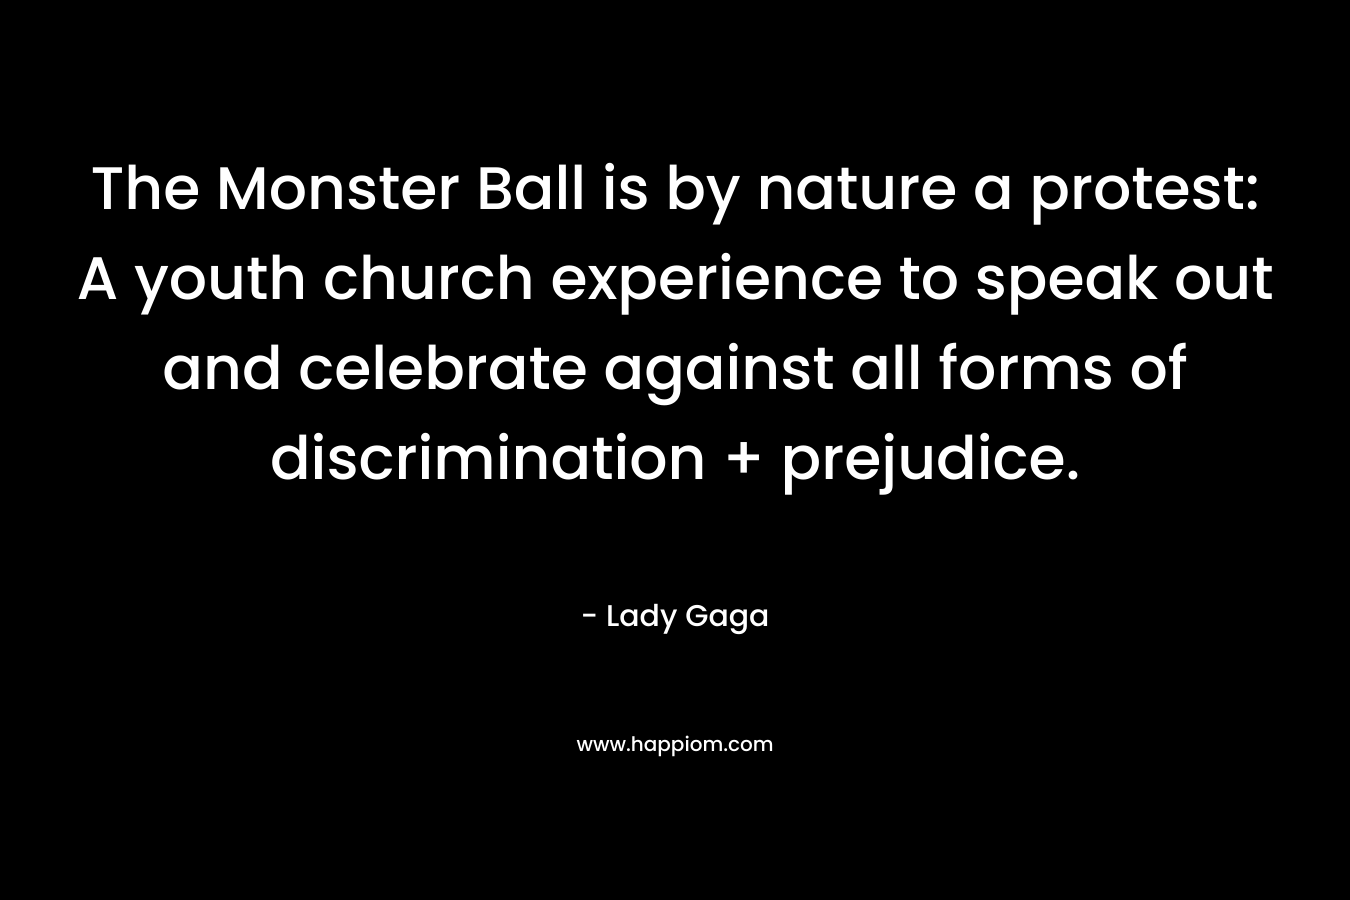 The Monster Ball is by nature a protest: A youth church experience to speak out and celebrate against all forms of discrimination + prejudice. – Lady Gaga